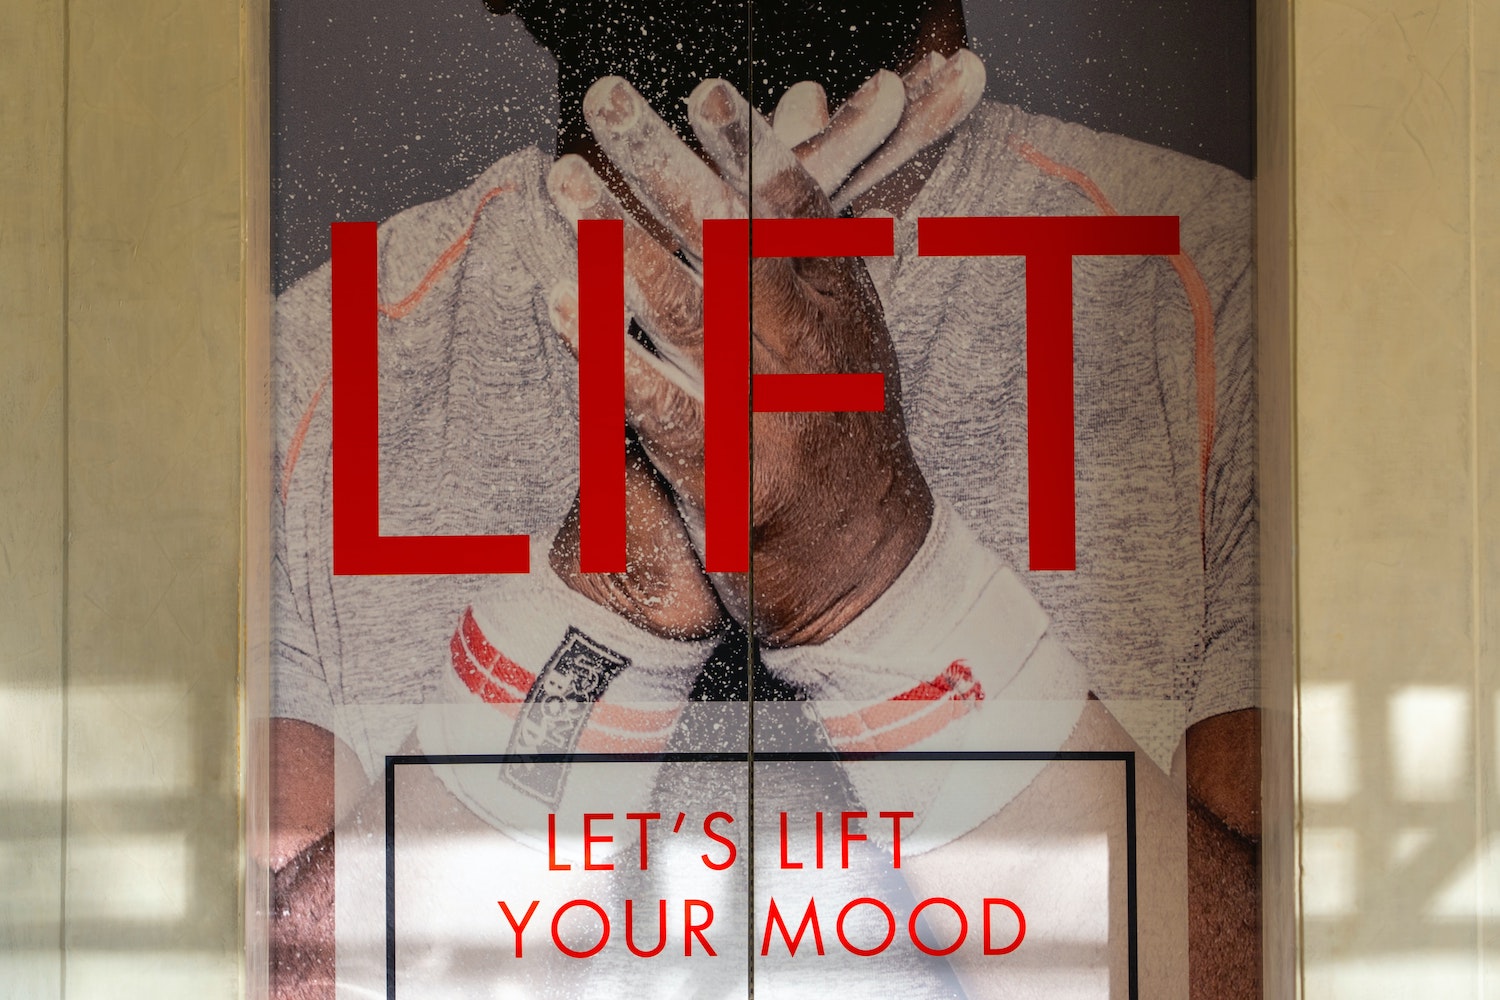 Elevator door with a poster of a man with text saying "Lift - let's lift your mood"